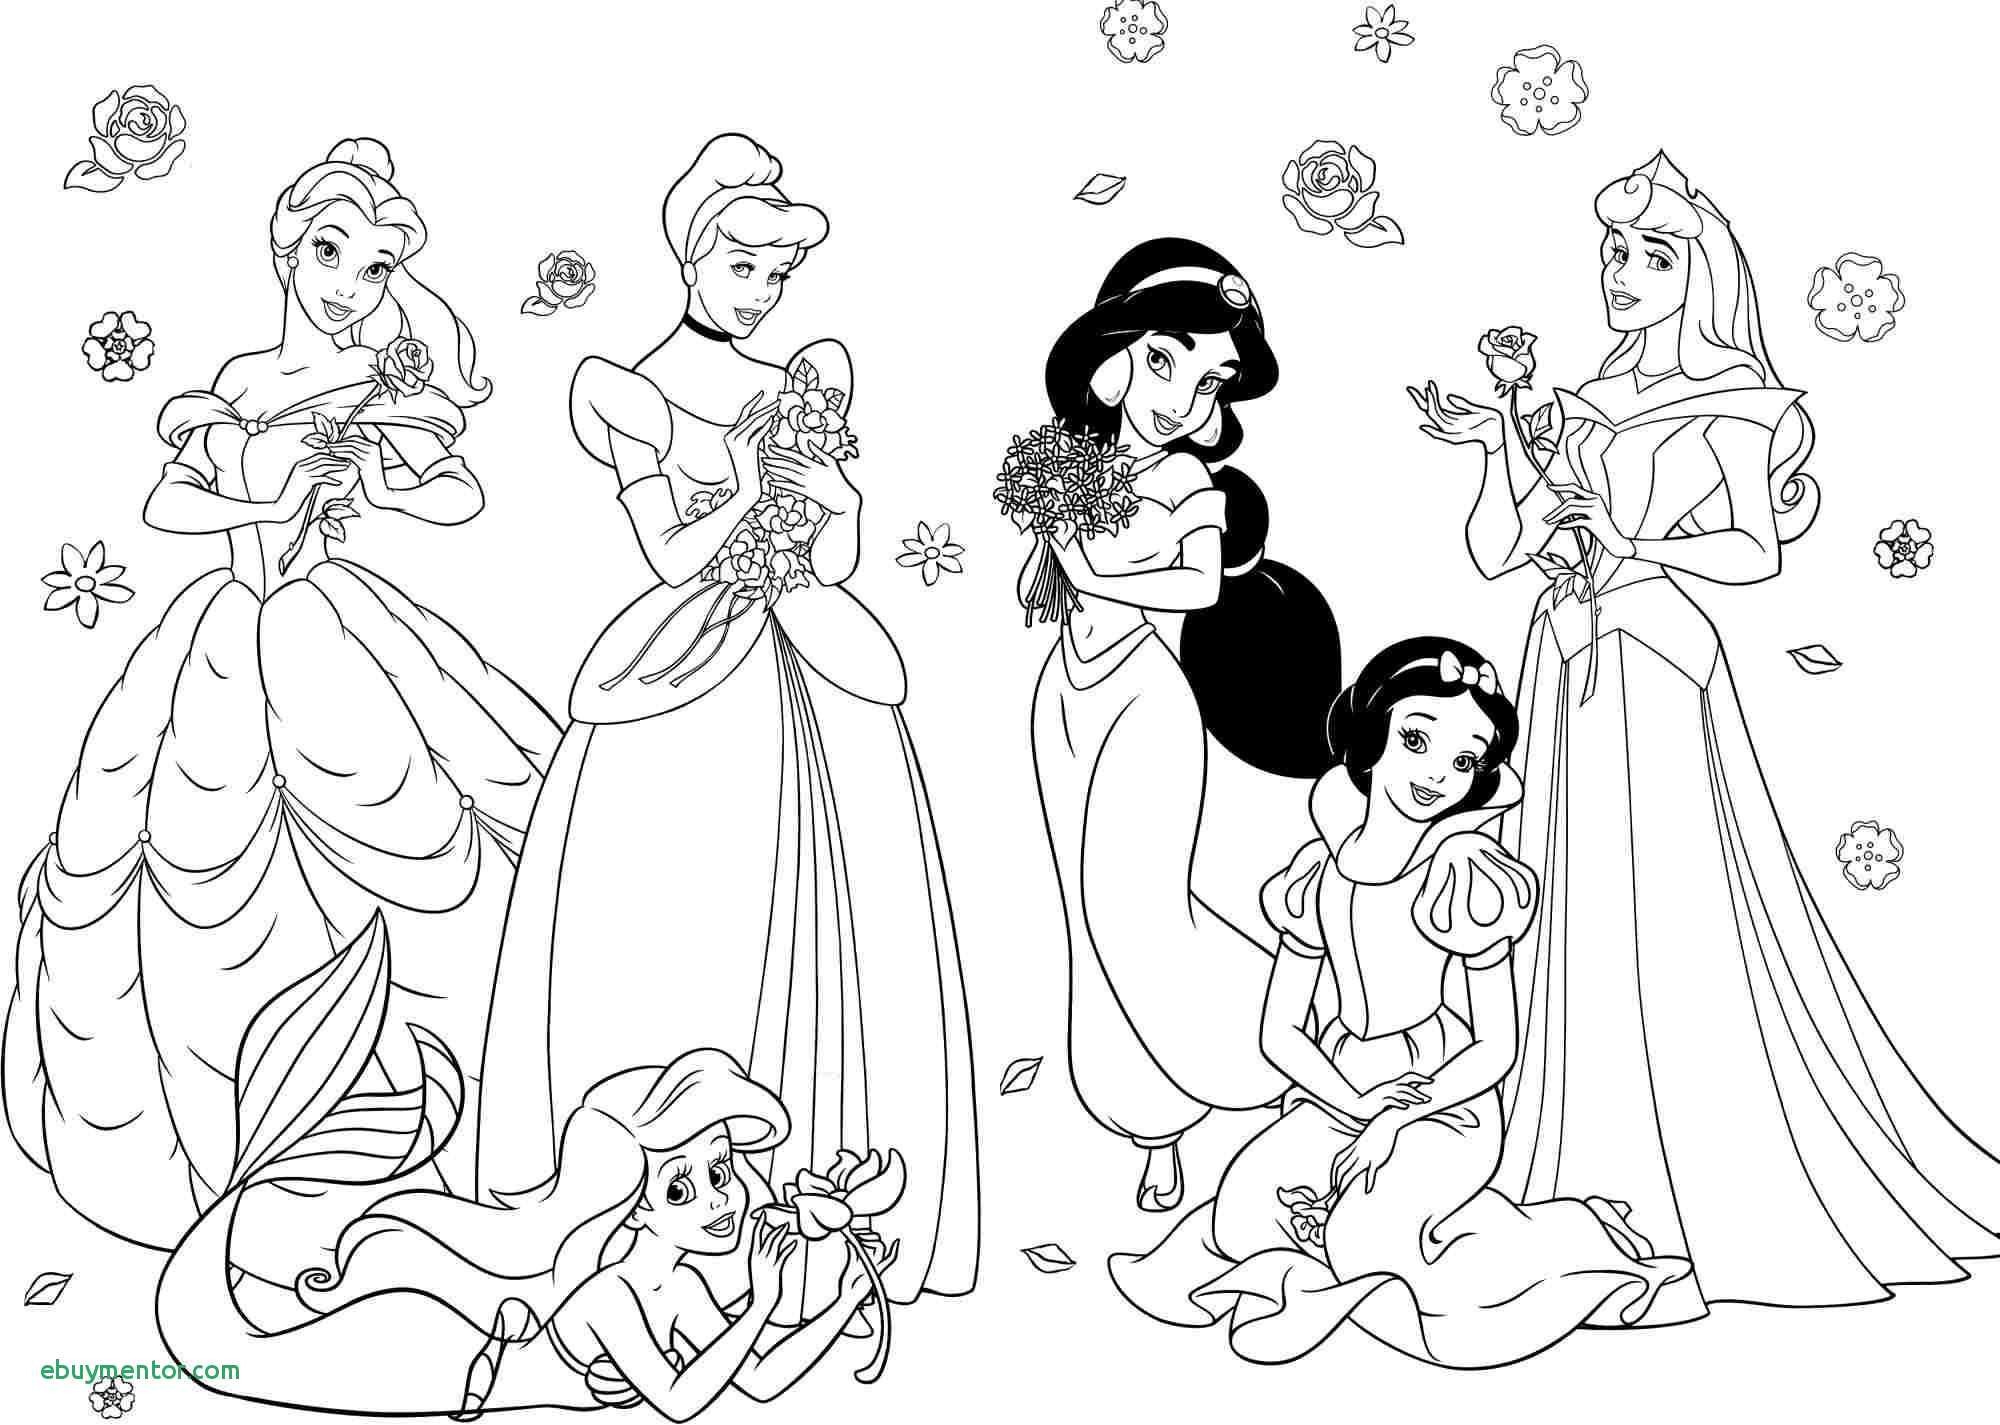 Disney Princess Coloring Pages Ariel Unique Princess Poppy Coloring Page Lovely Awesome Od Dog Coloring Pages